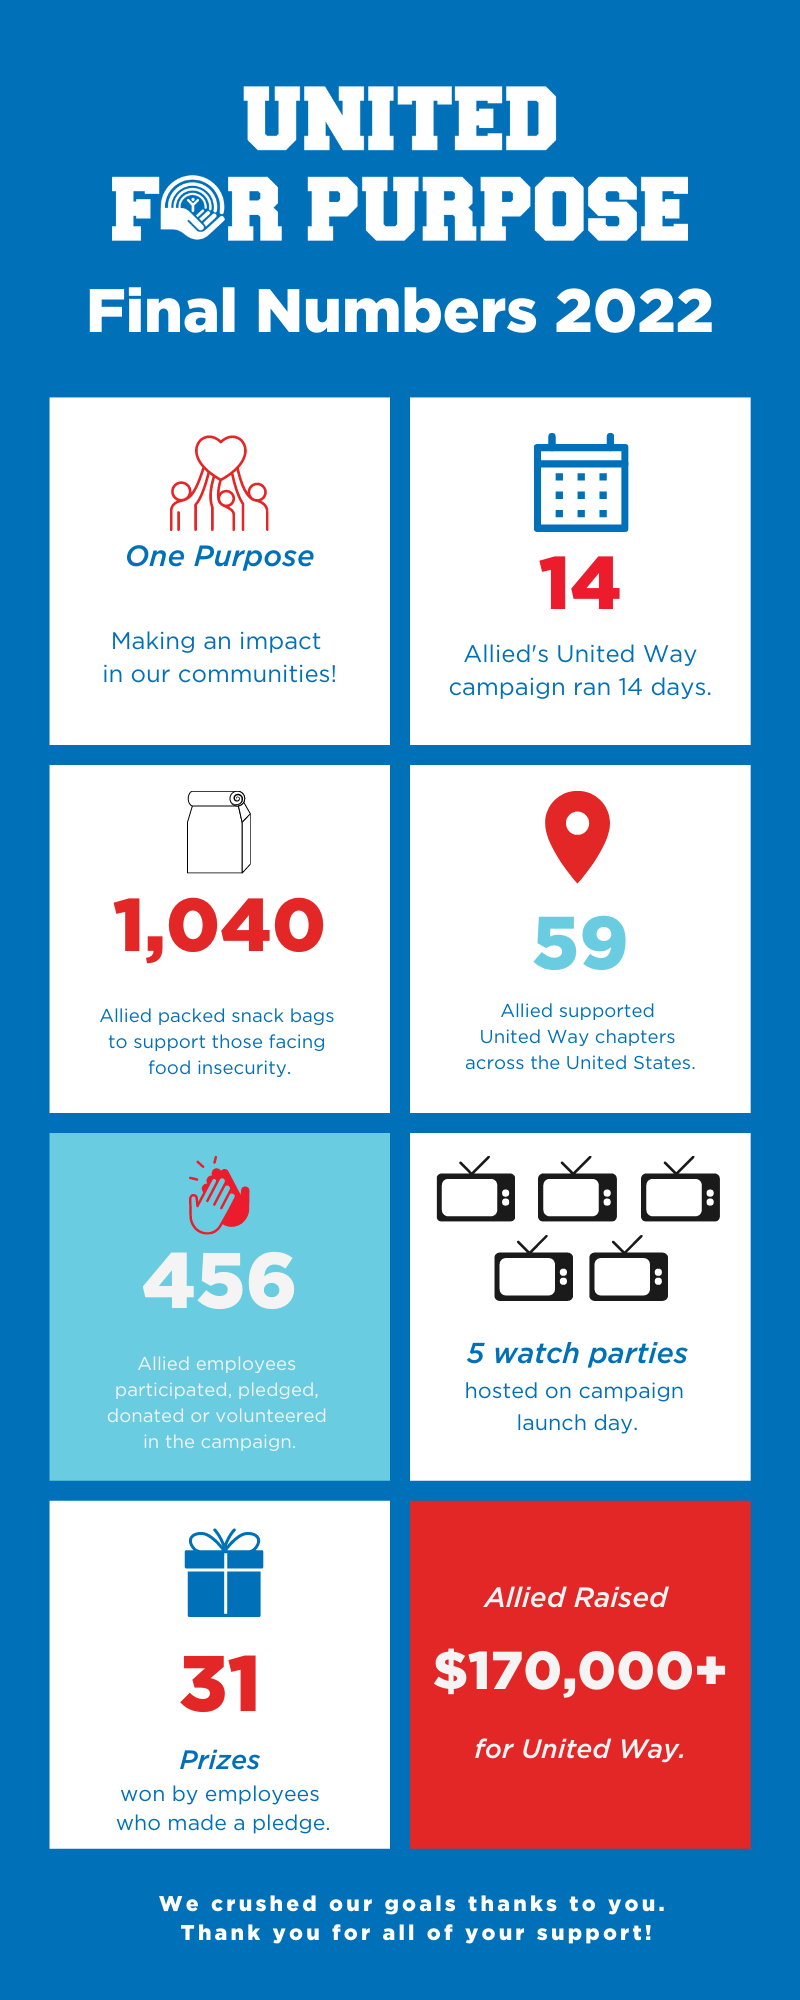 An image showing the United "For Purpose" final numbers of 2022 from Allied Solutions. The campaign ran for 14 days, assembling 1,040 snack bags to support those facing food insecurity. Efforts supported 59 United Way chapters across the United States, assisted by 456 Allied employees through volunteering or donations. 5 watch parties were hosted on the campaign launch day, and 31 prizes were given to employees who made pledges of support. The total amount raised by Allied was $170,000 for United Way.